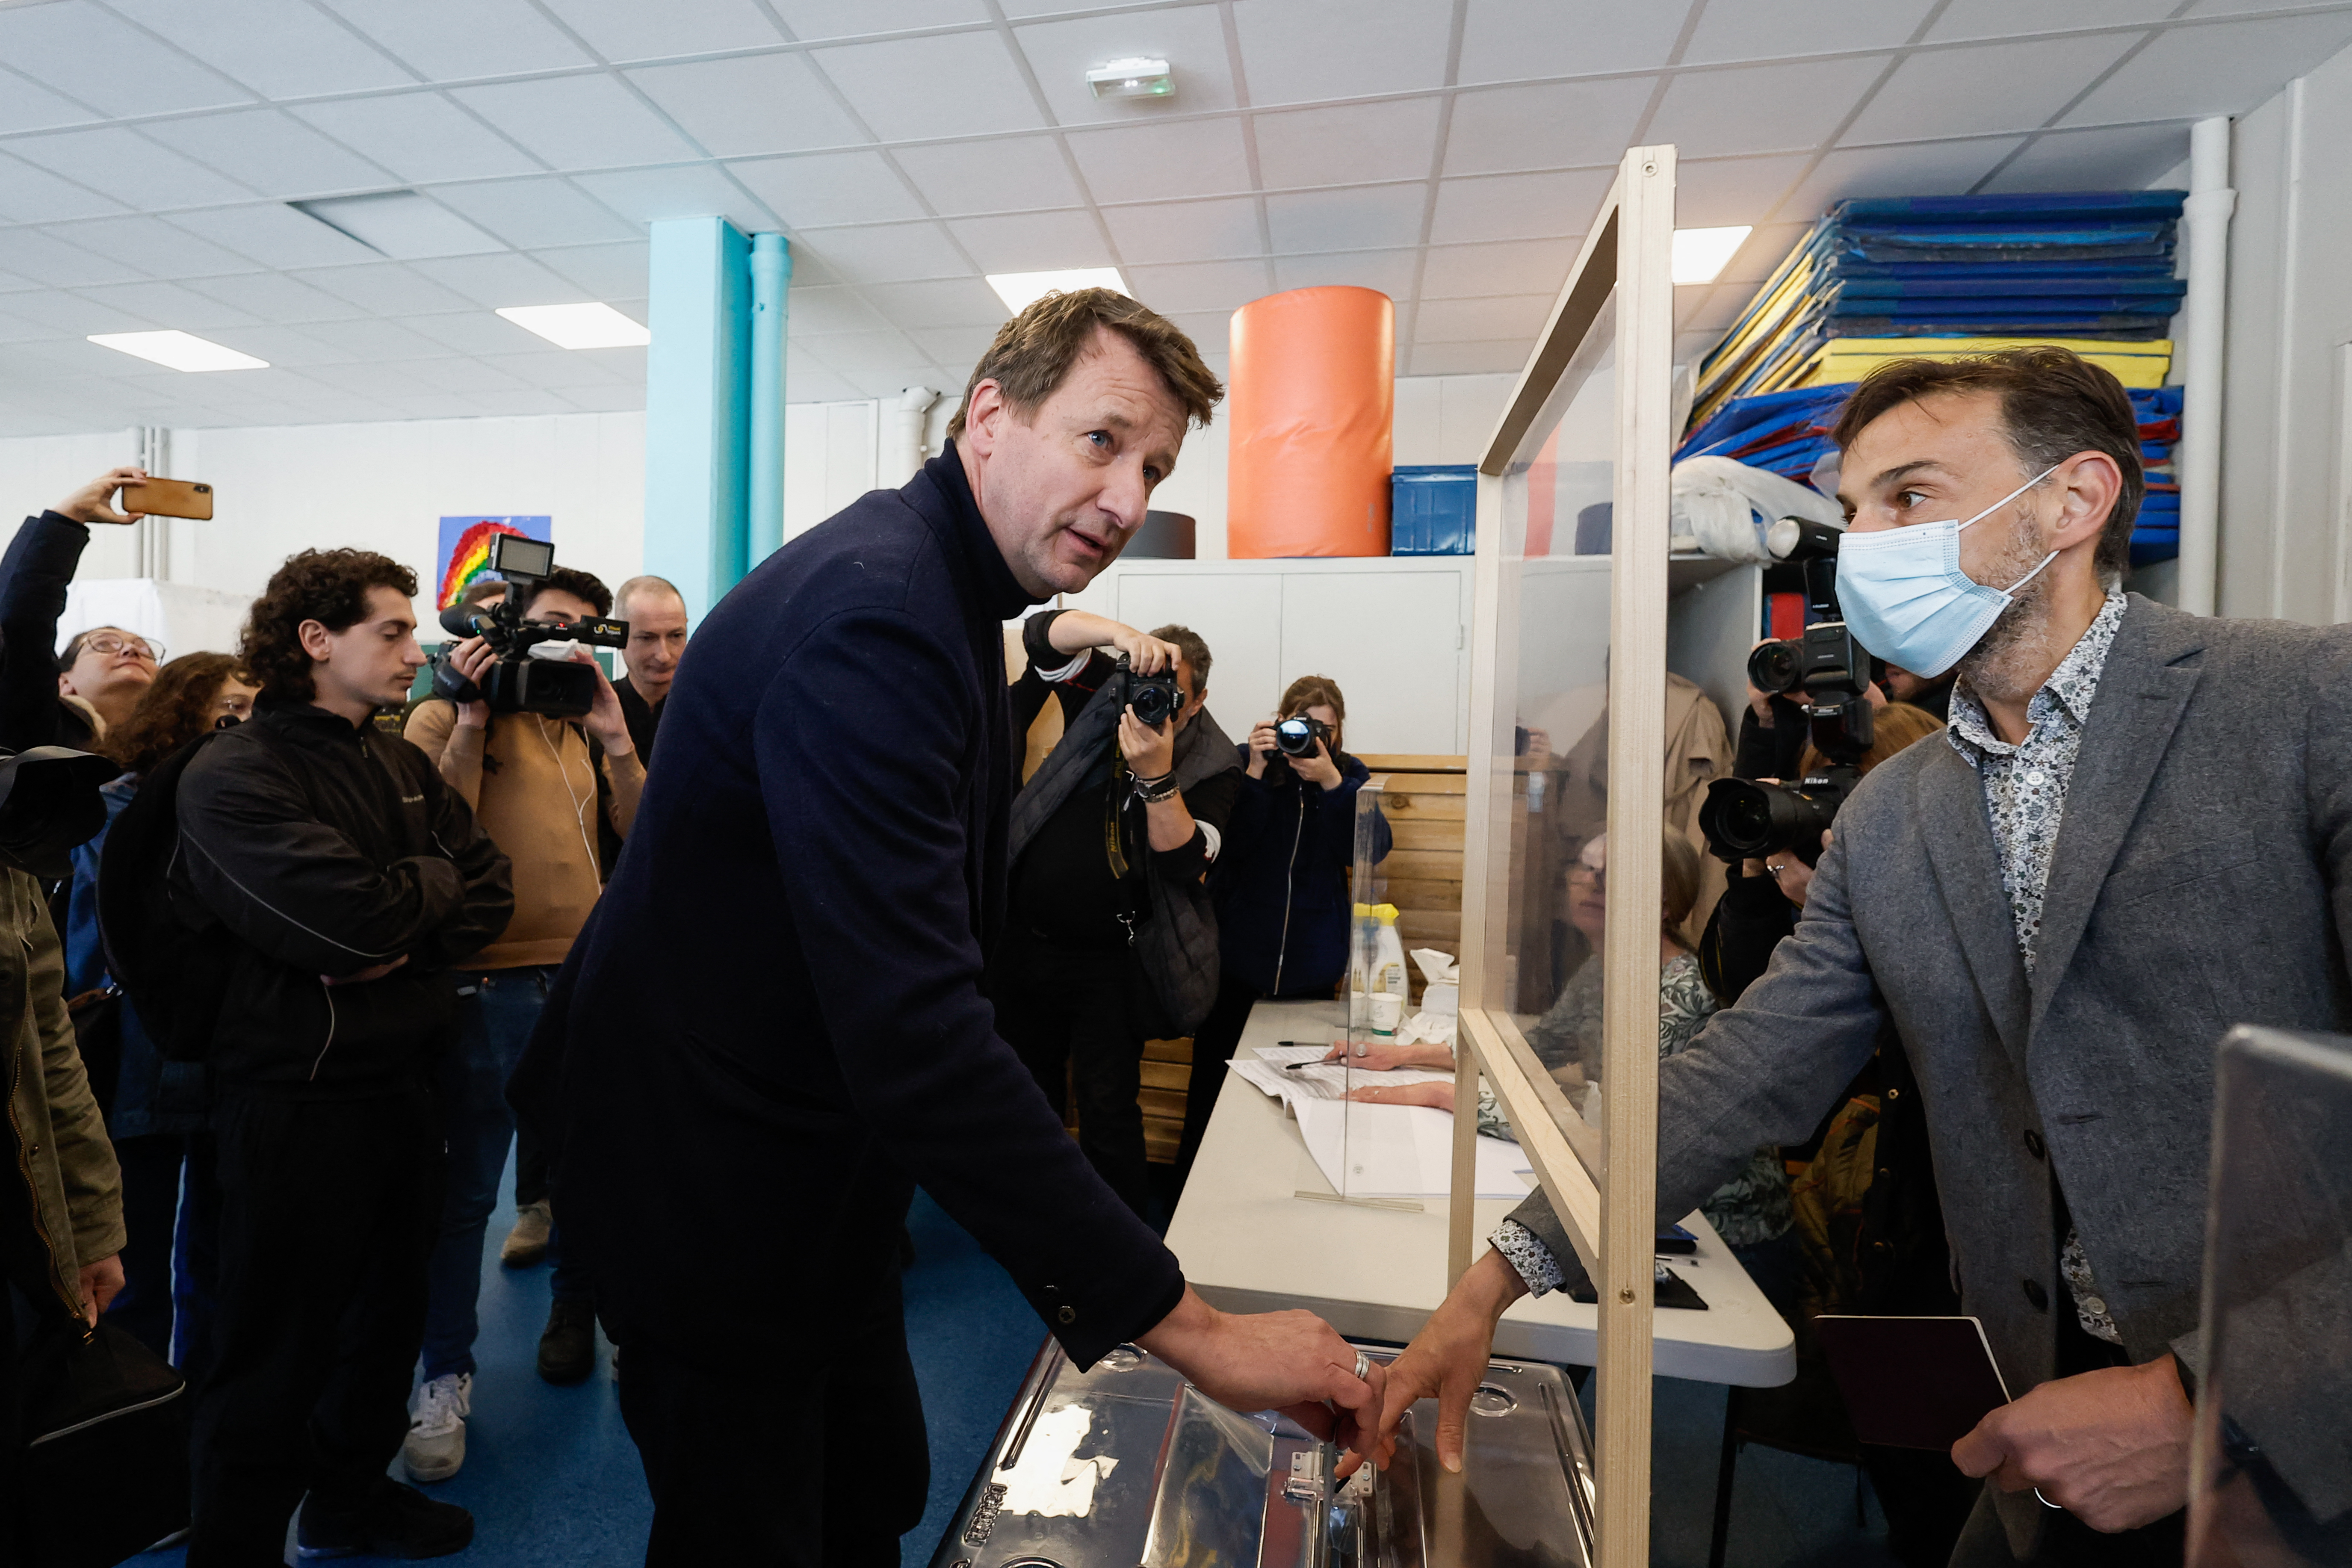 Green candidate Jadot votes in the first round of the 2022 French presidential election